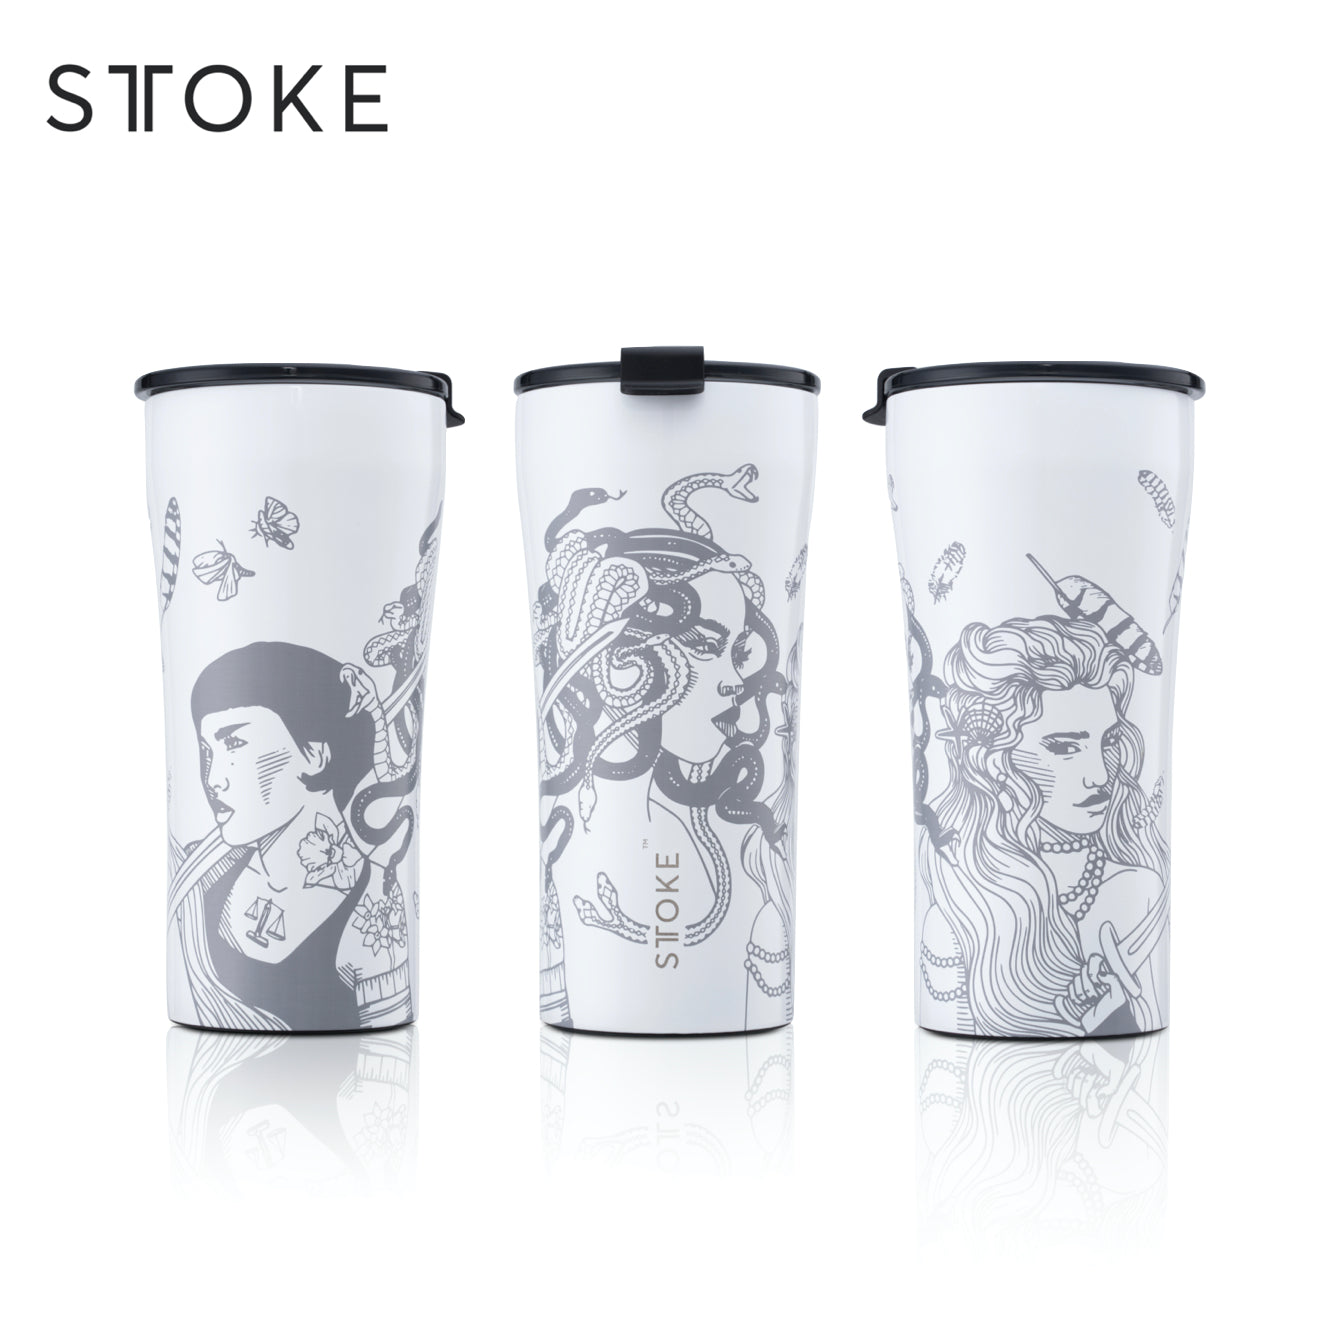 Sttoke Leakproof Ceramic Cup 16 oz white